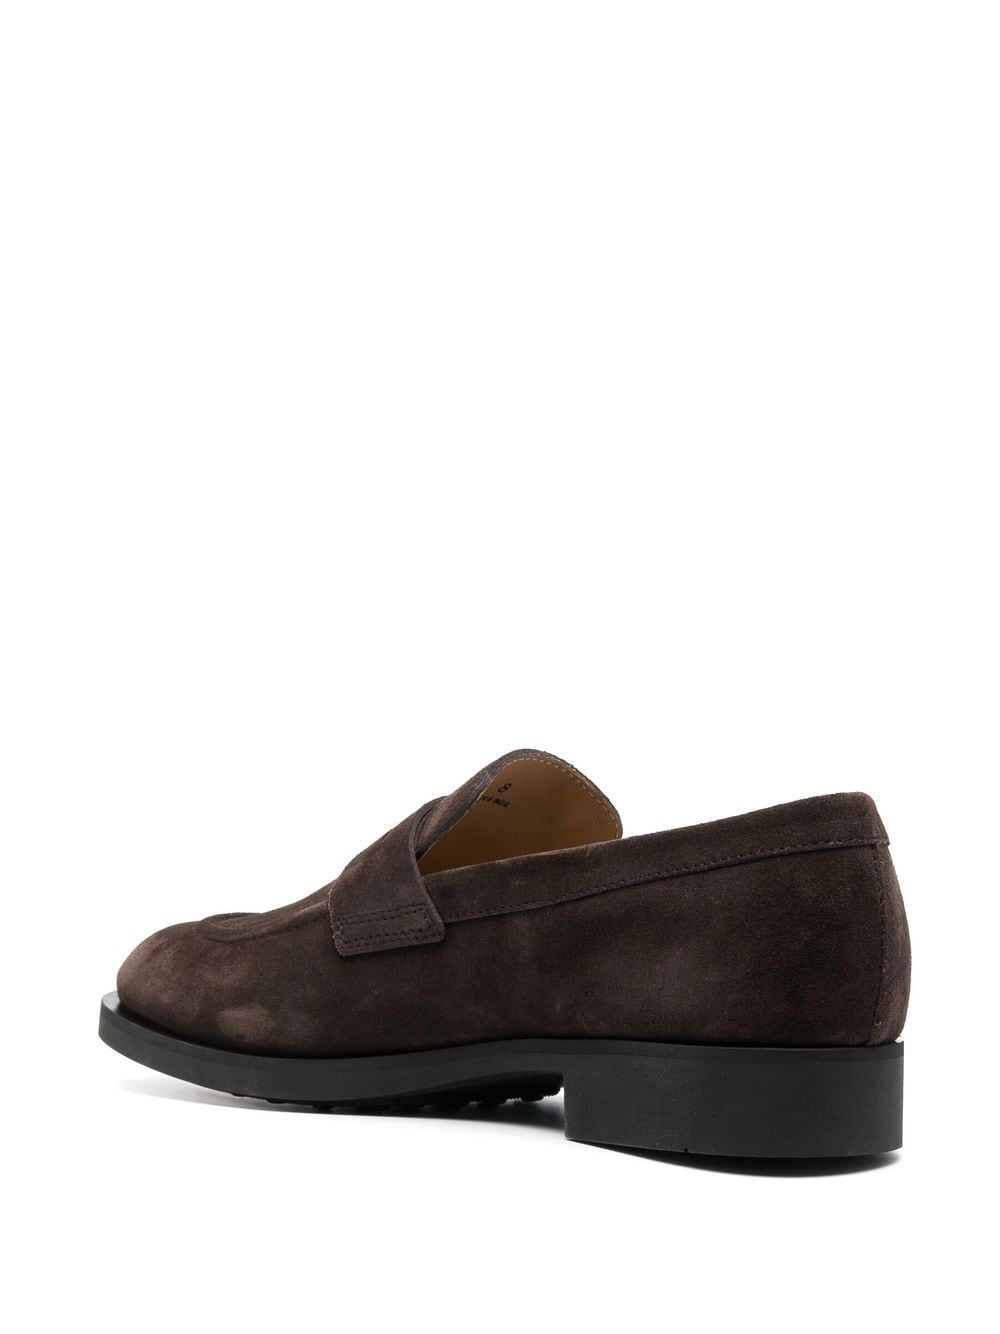 Suede moccasin loafers